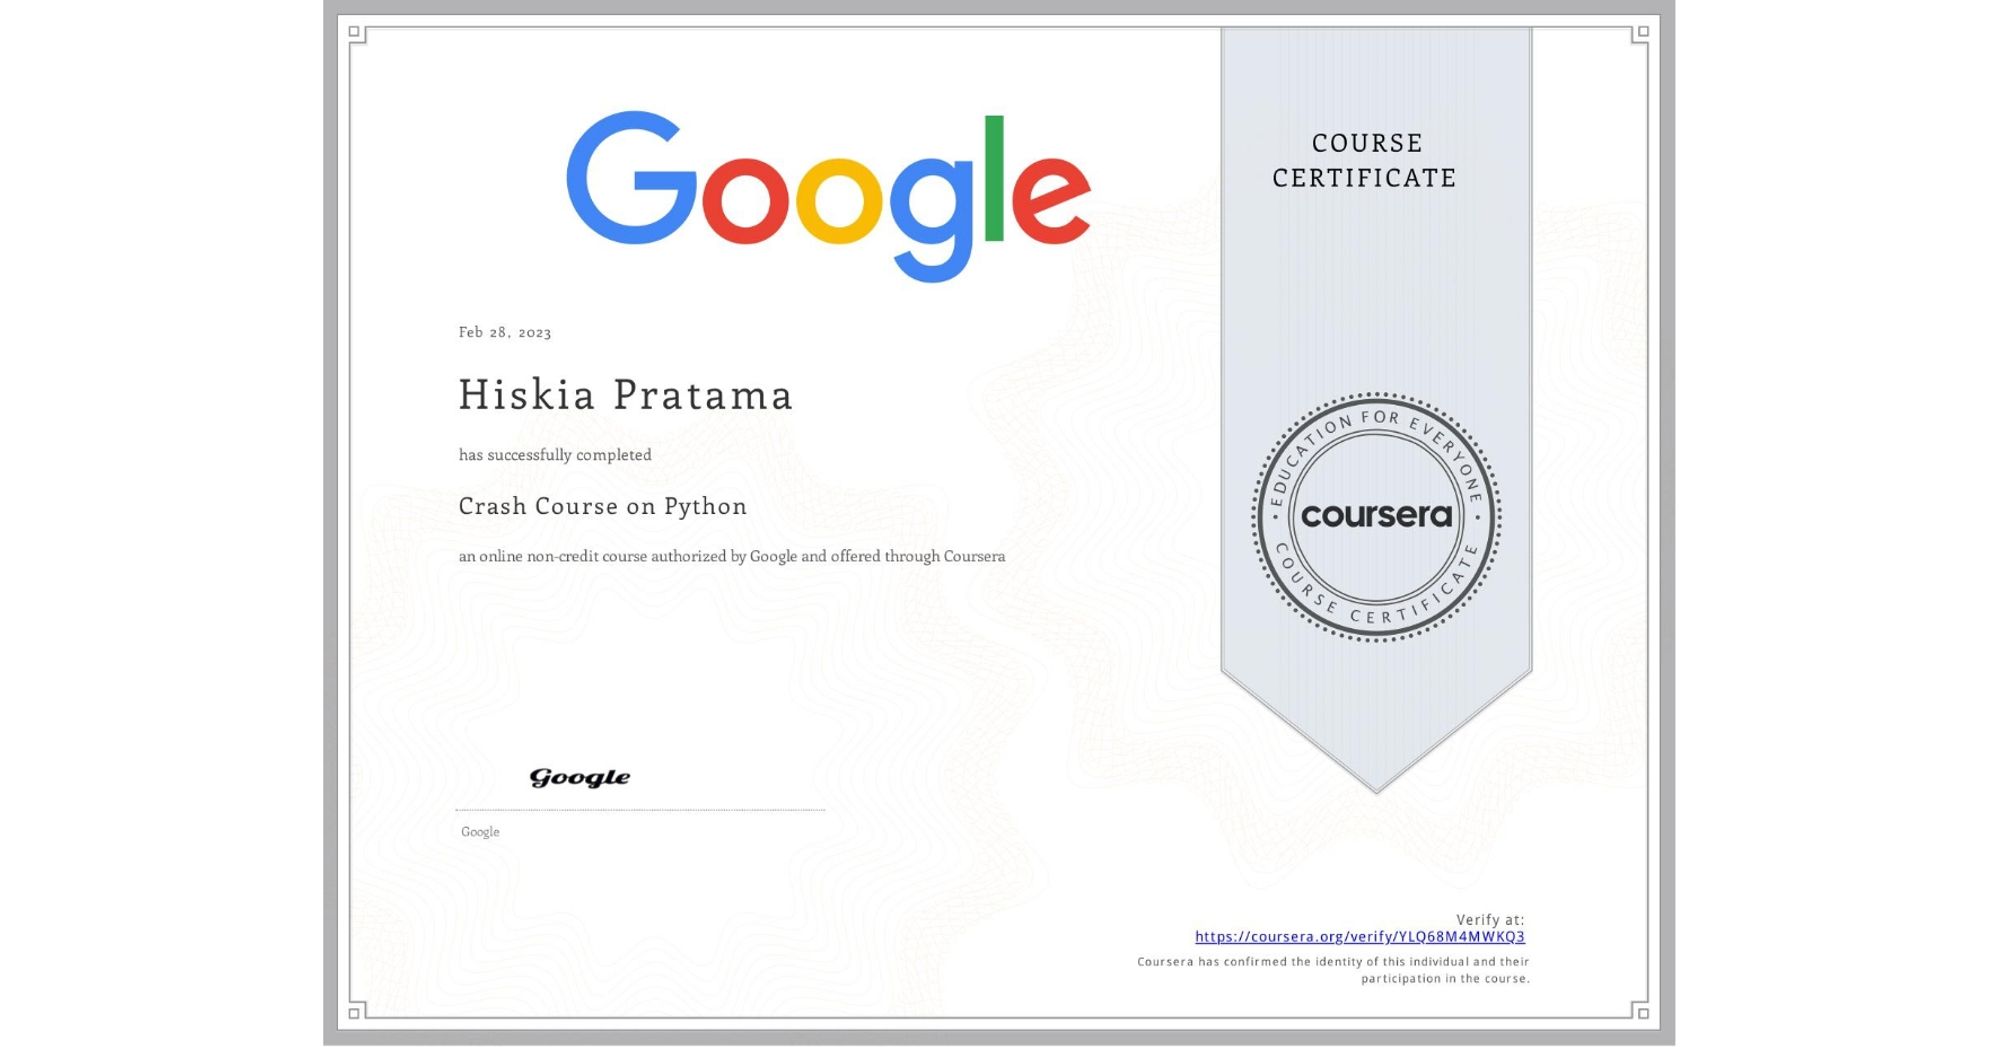 Completion Certificate for Crash Course on Python